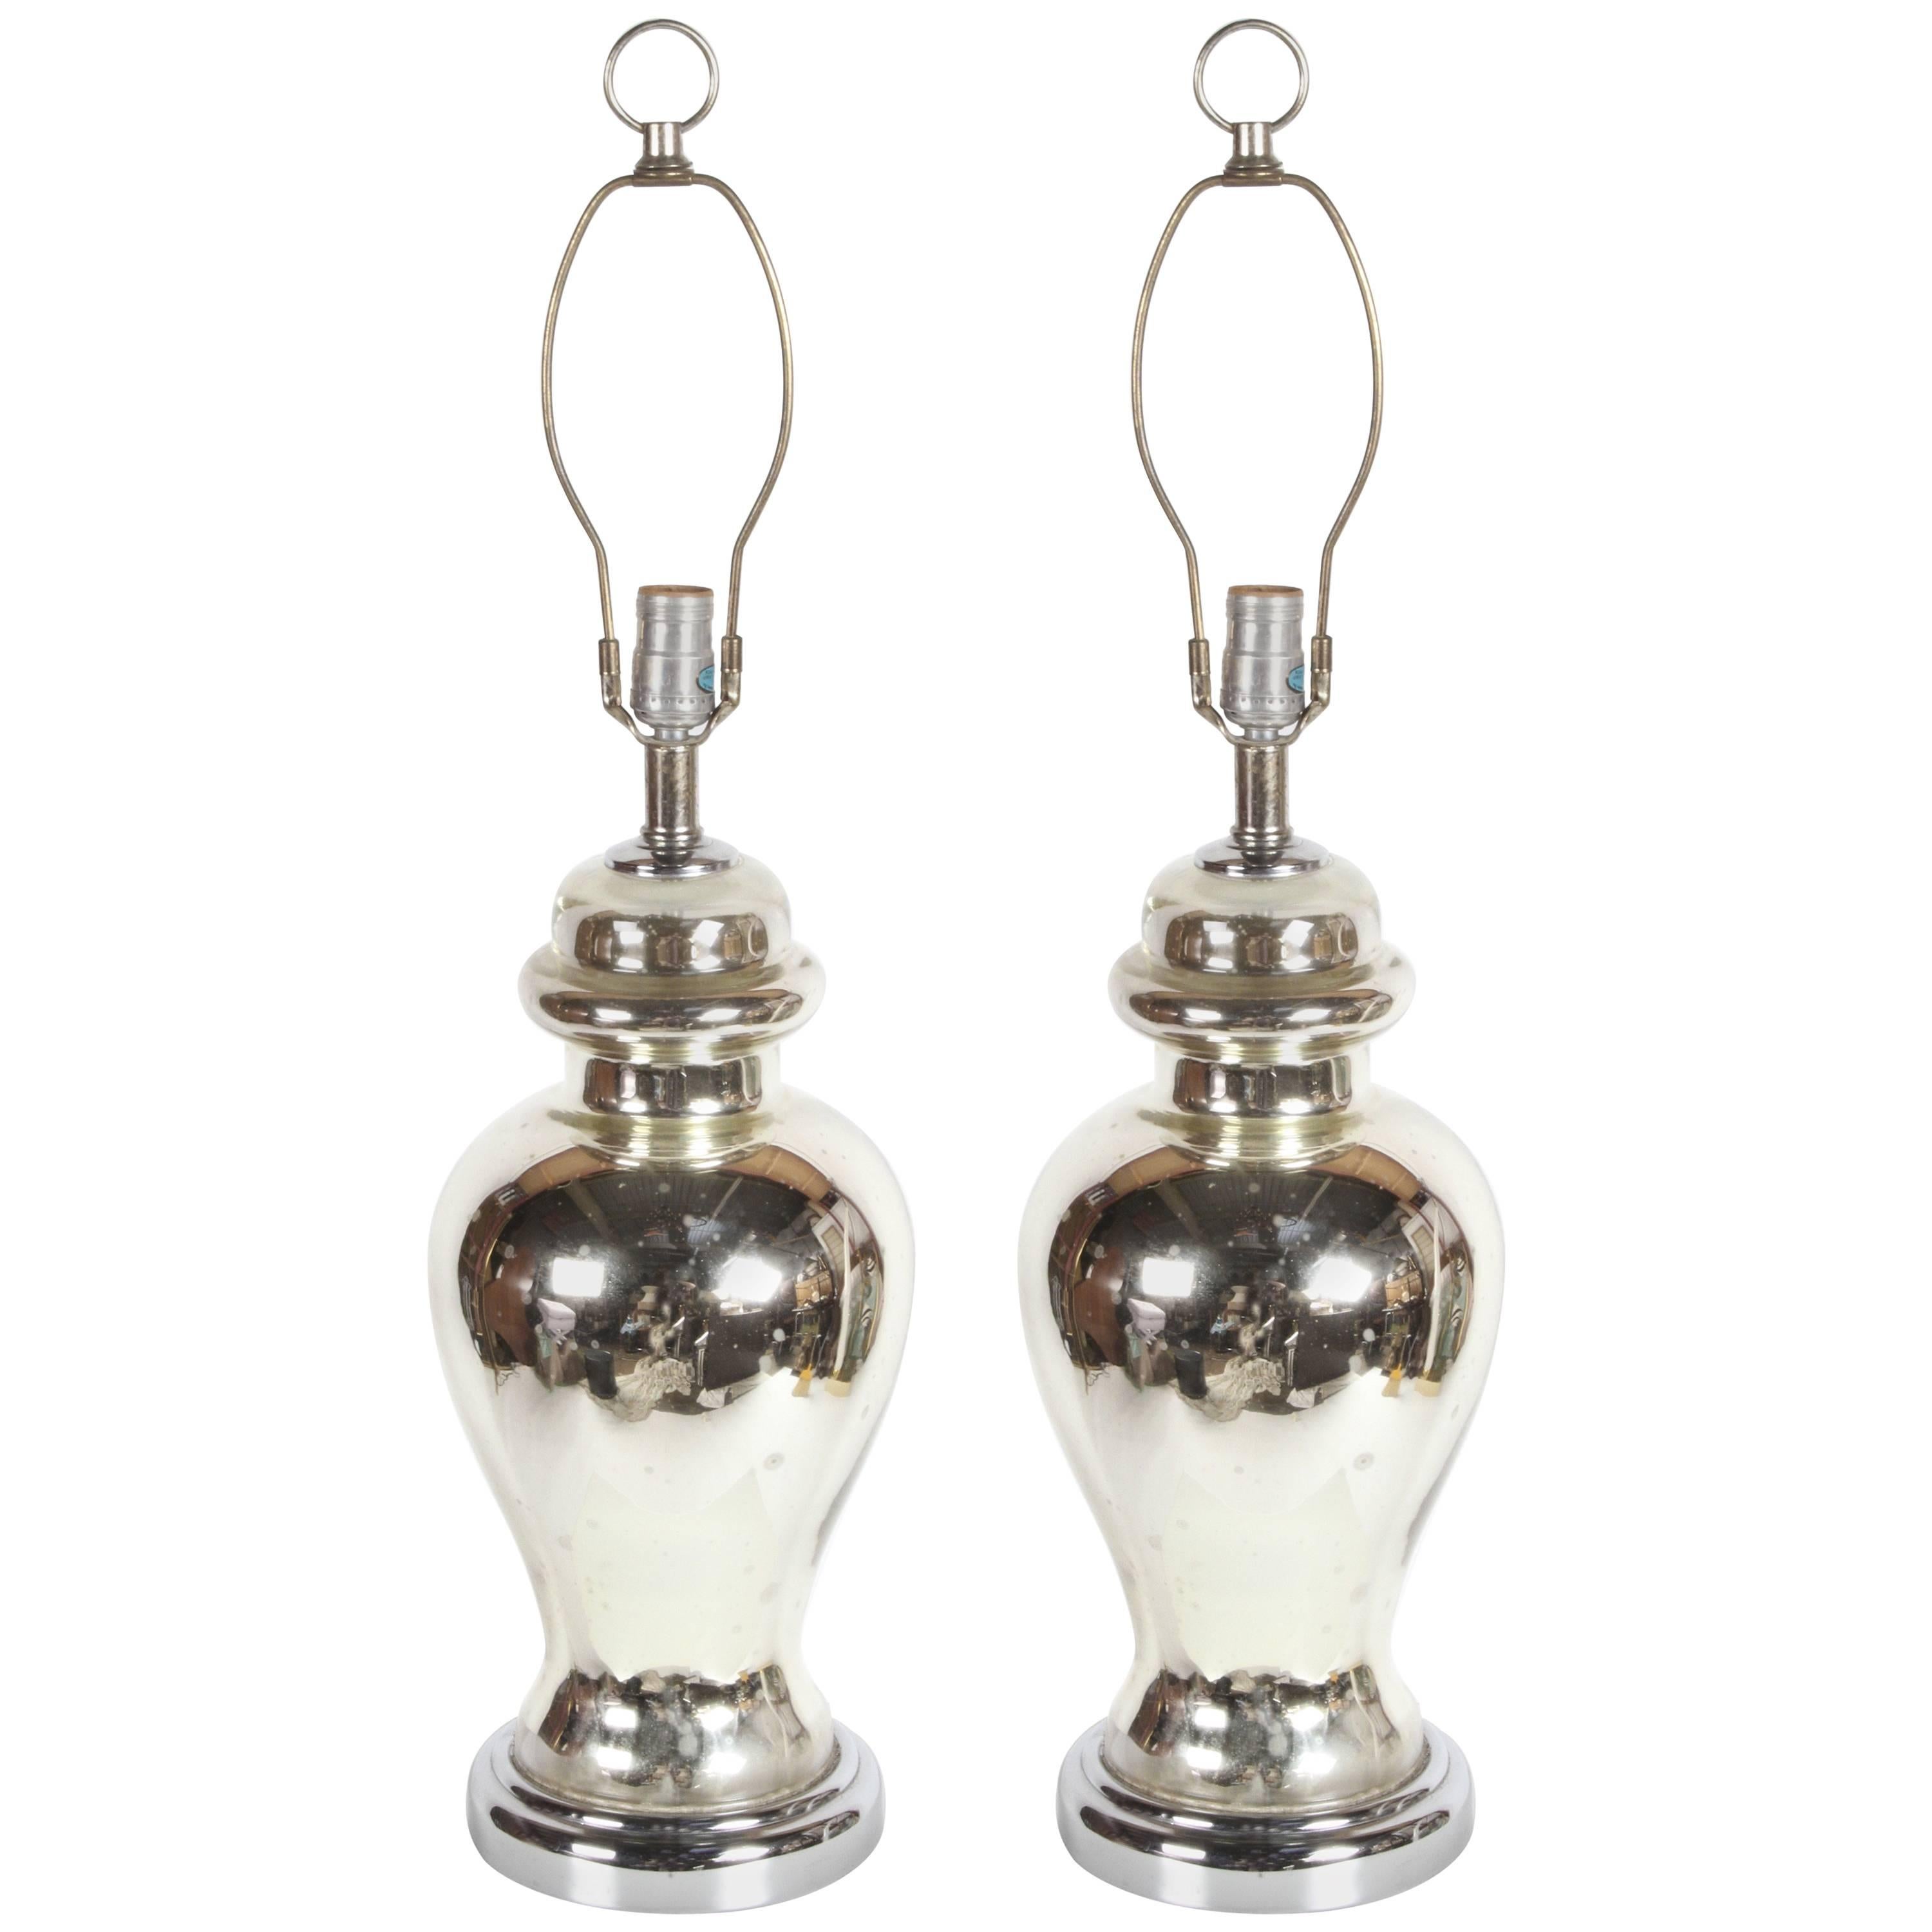 Pair of Mid-Century Classical Urn Form Mercury Glass Table Lamps For Sale